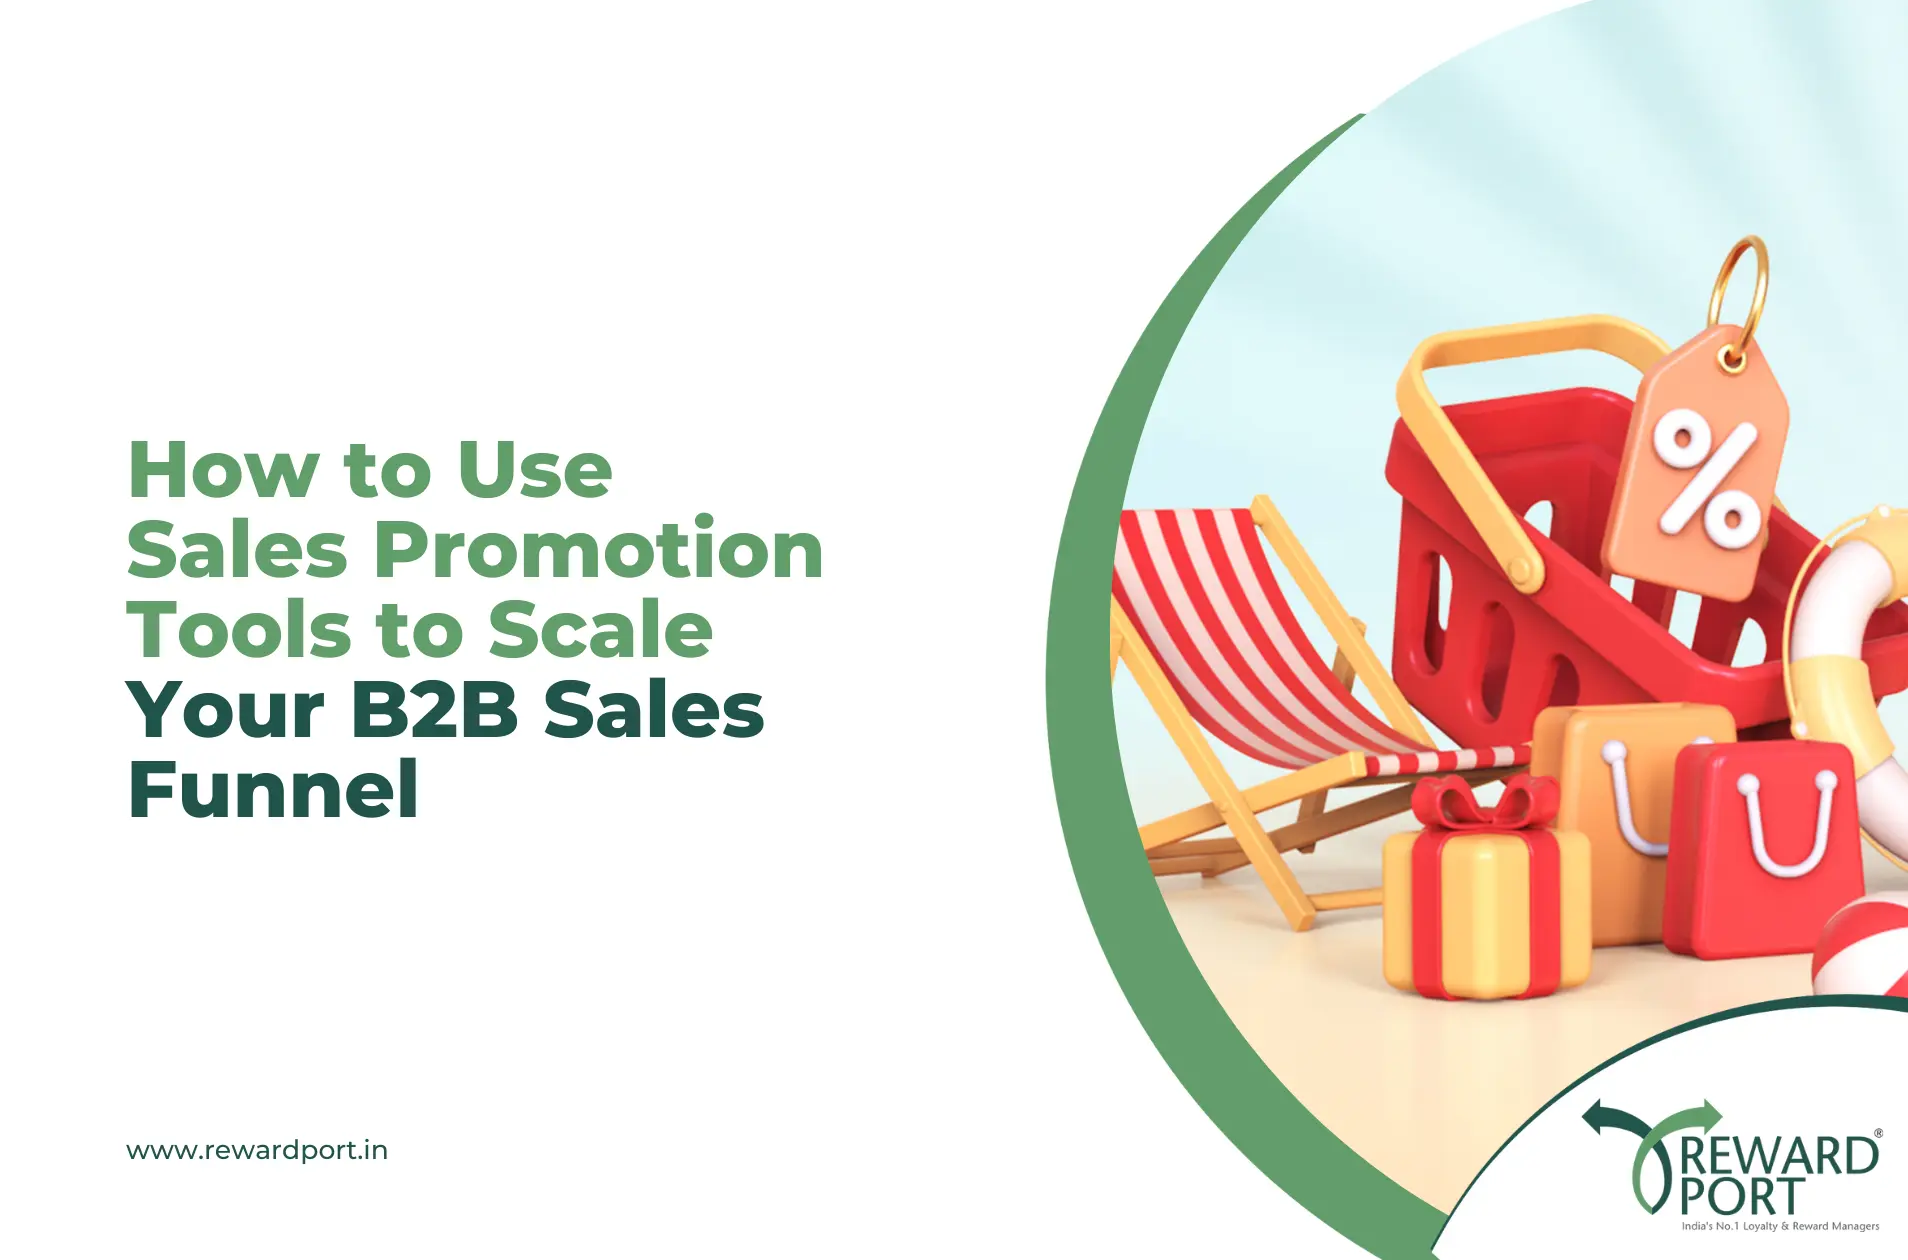 How to Use Sales Promotion Tools to Scale Your B2B Sales Funnel